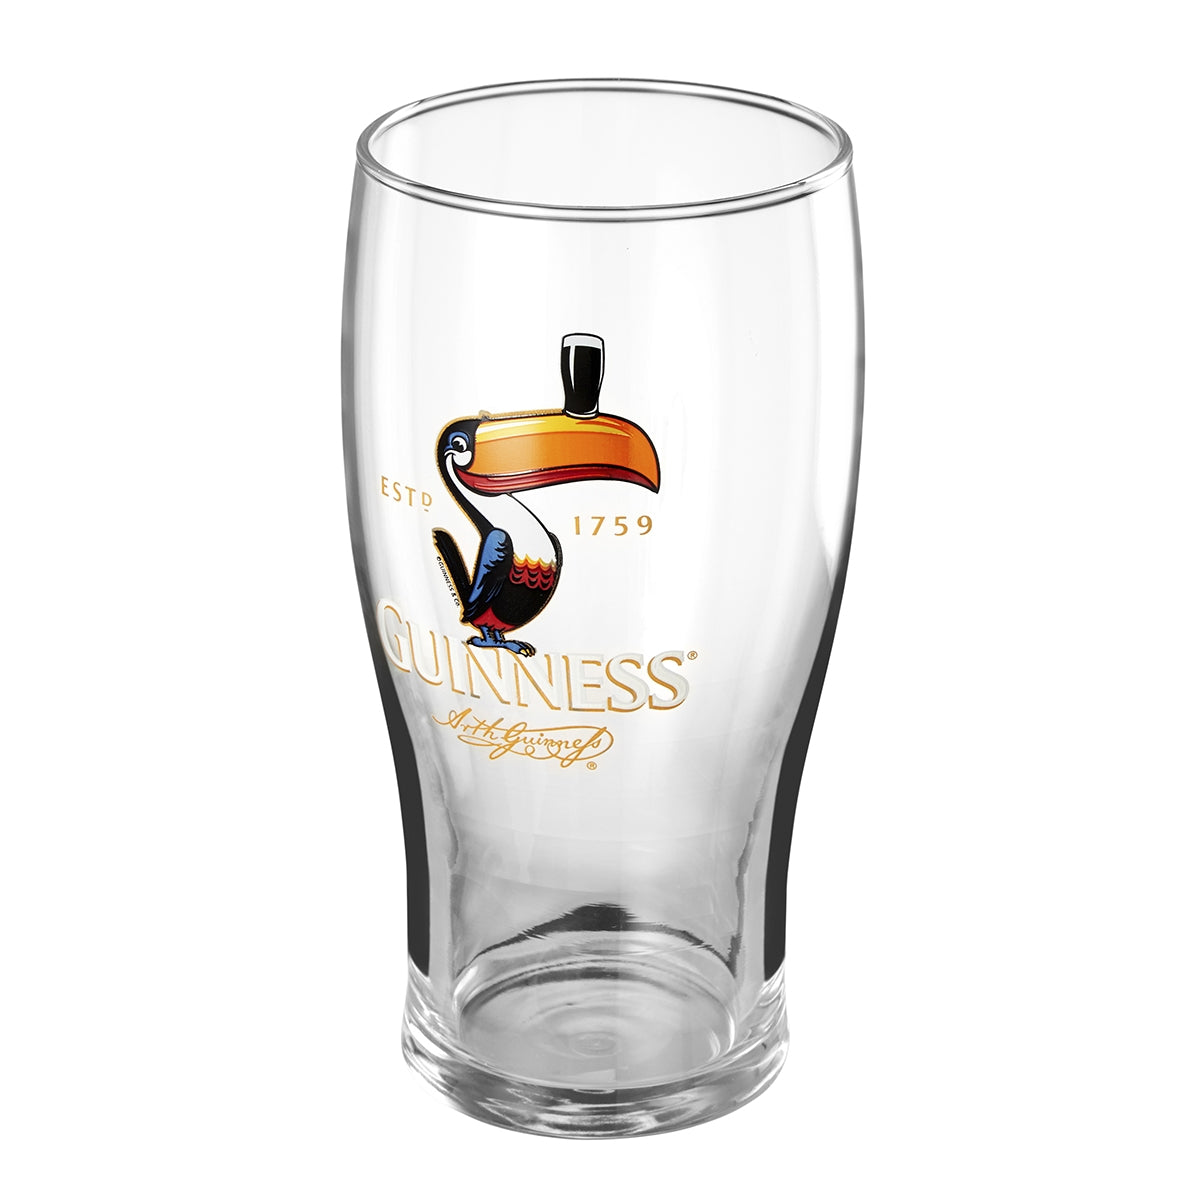 A Guinness Toucan image adorned Pint Glass.